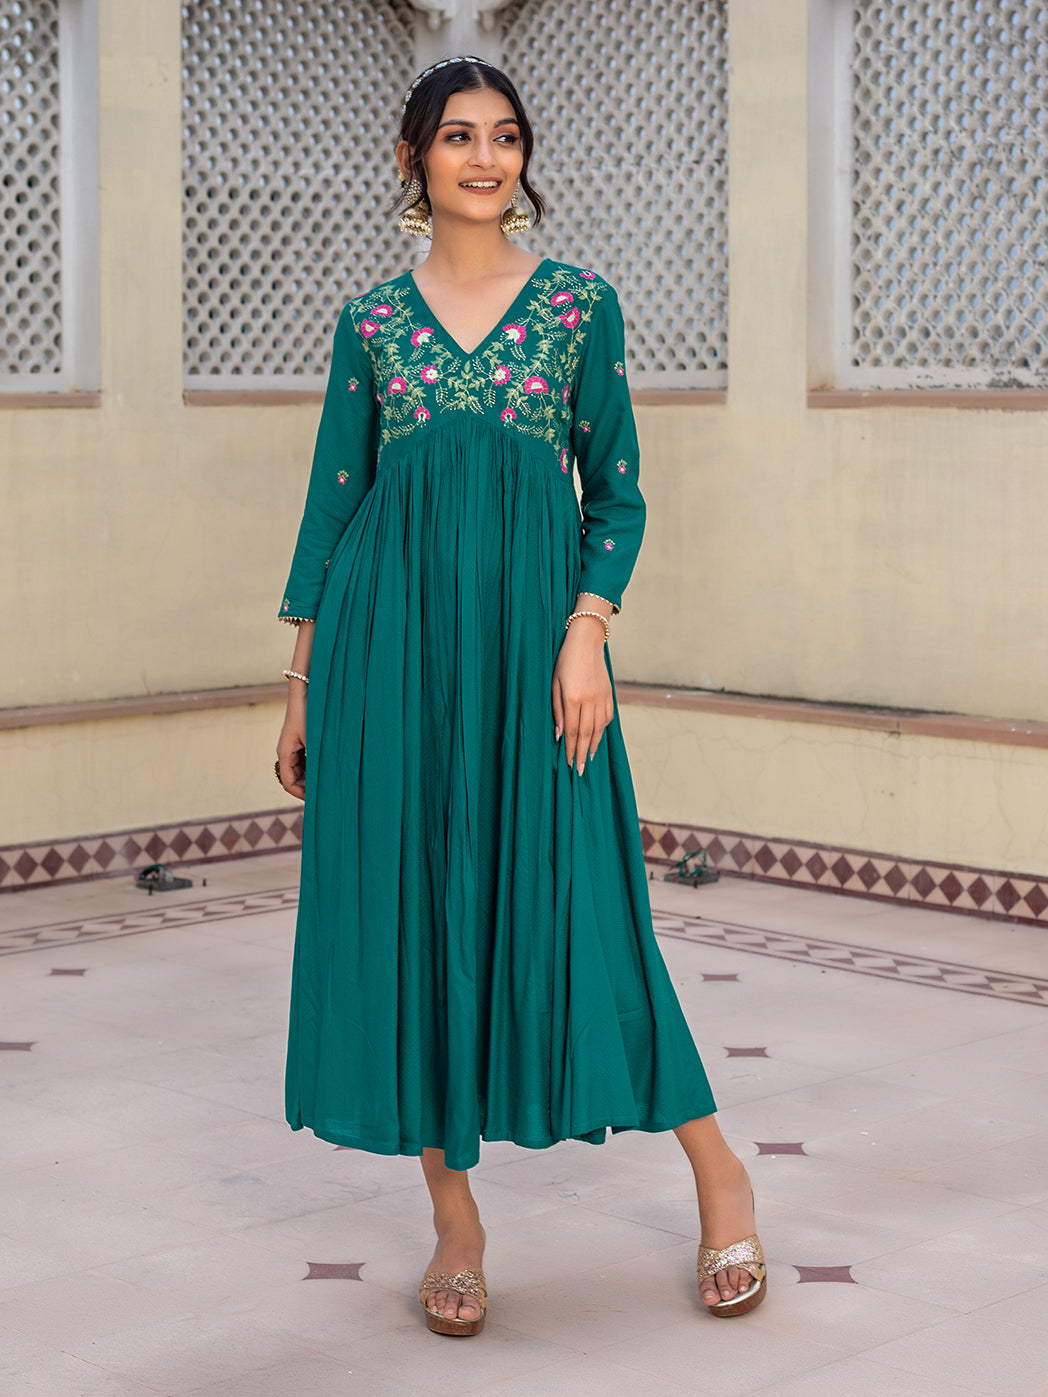 this-floral-embroidered-v-neck-green-a-line-dress-is-a-stunning-addition-to-your-wardrobe-this-dress-features-multicolor-embroidery-creating-a-unique-look-that-will-stand-out-in-any-setting